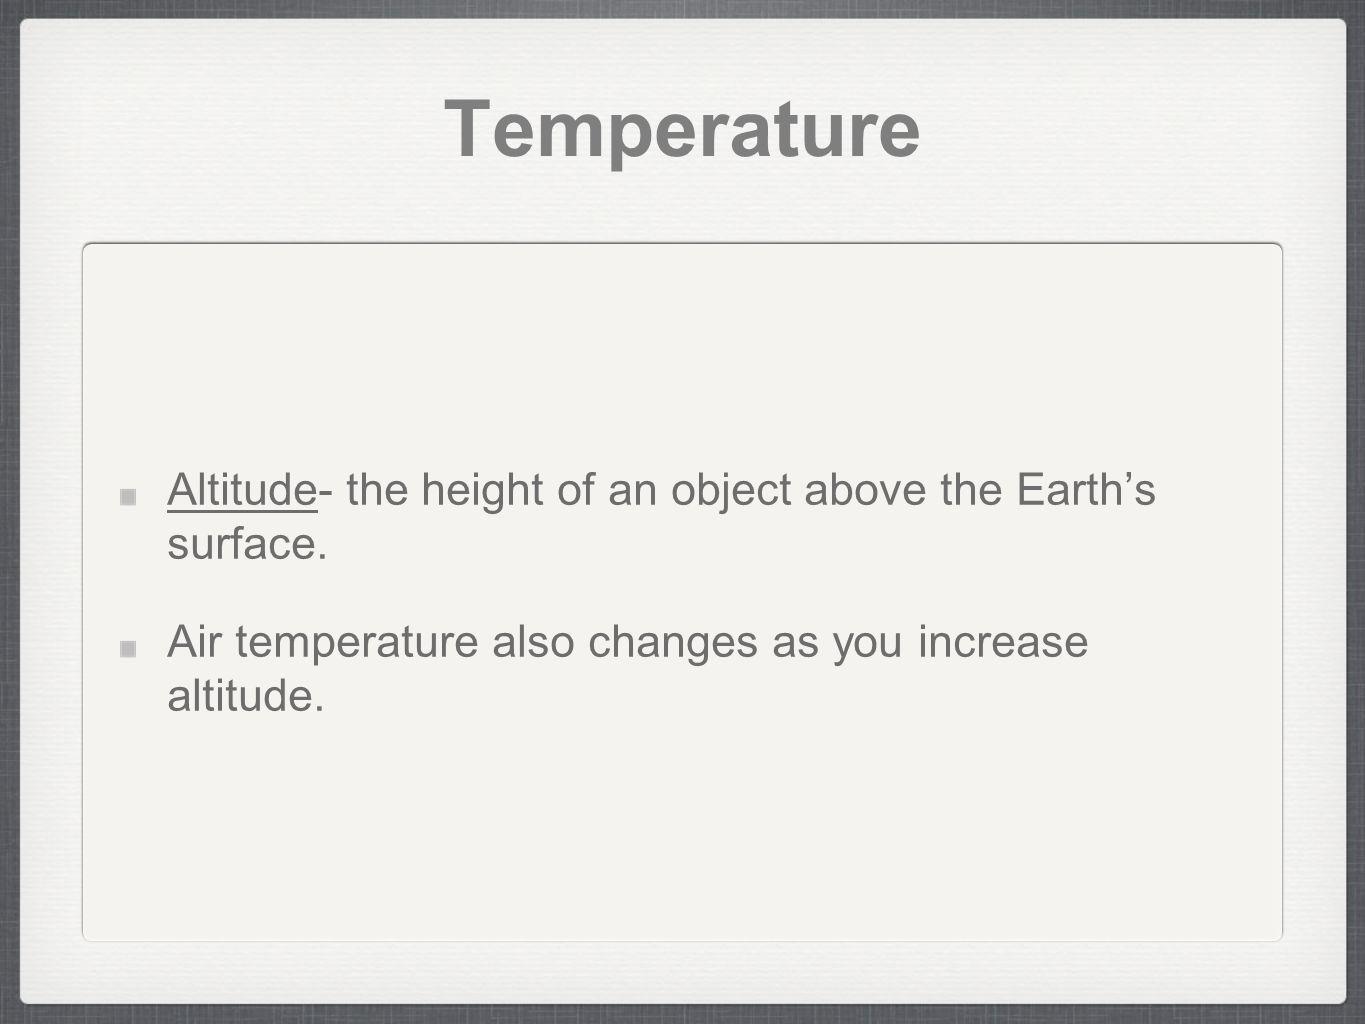 Temperature Altitude- the height of an object above the Earth’s surface.